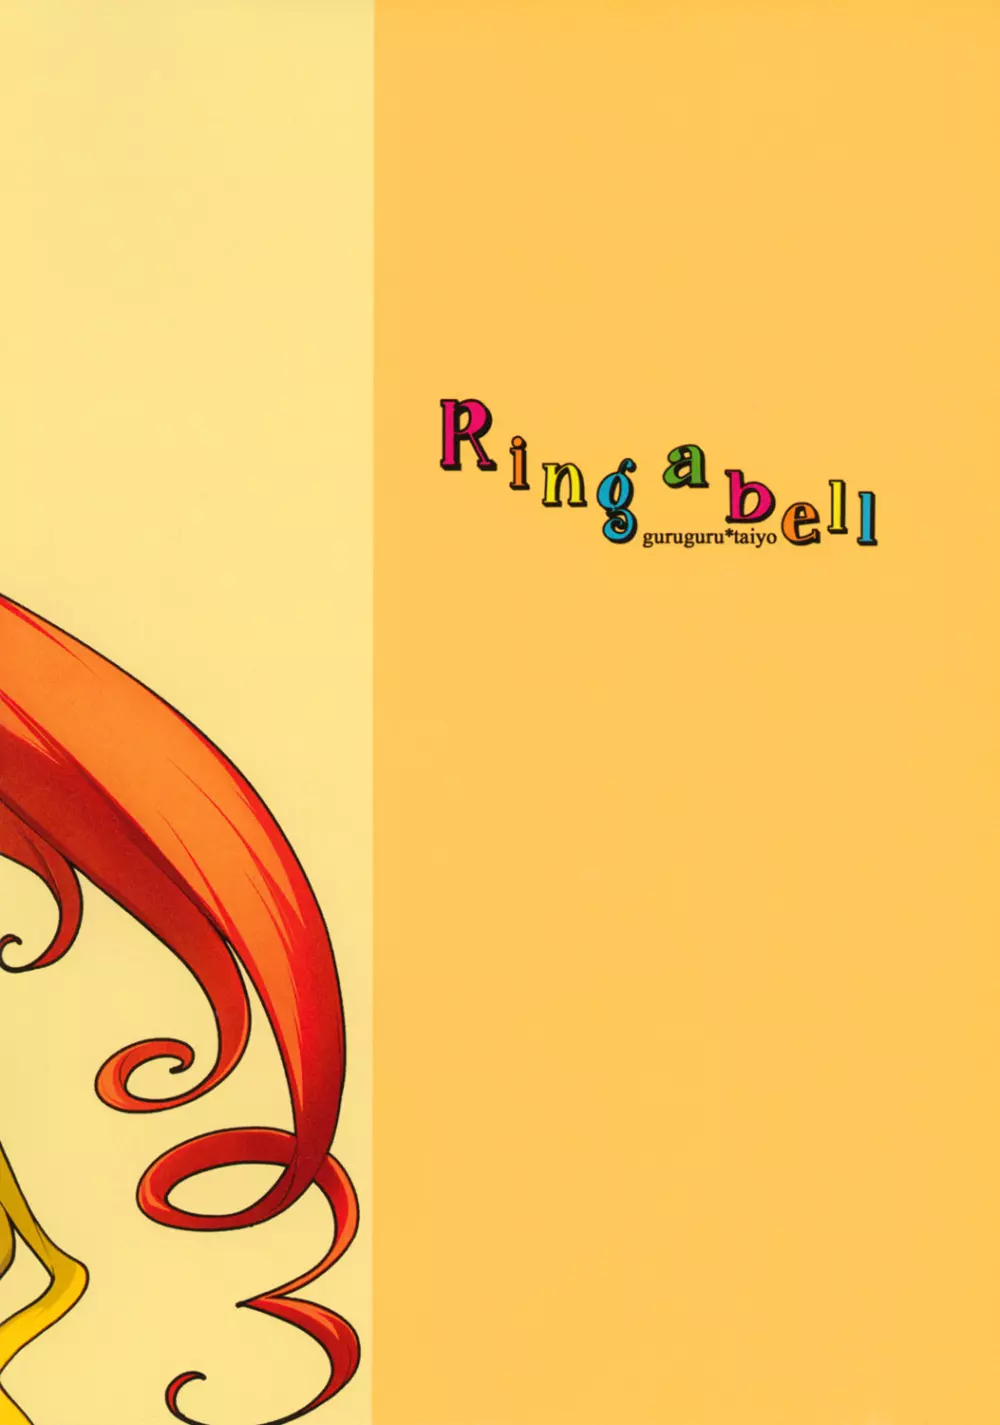 Ring a bell 20ページ